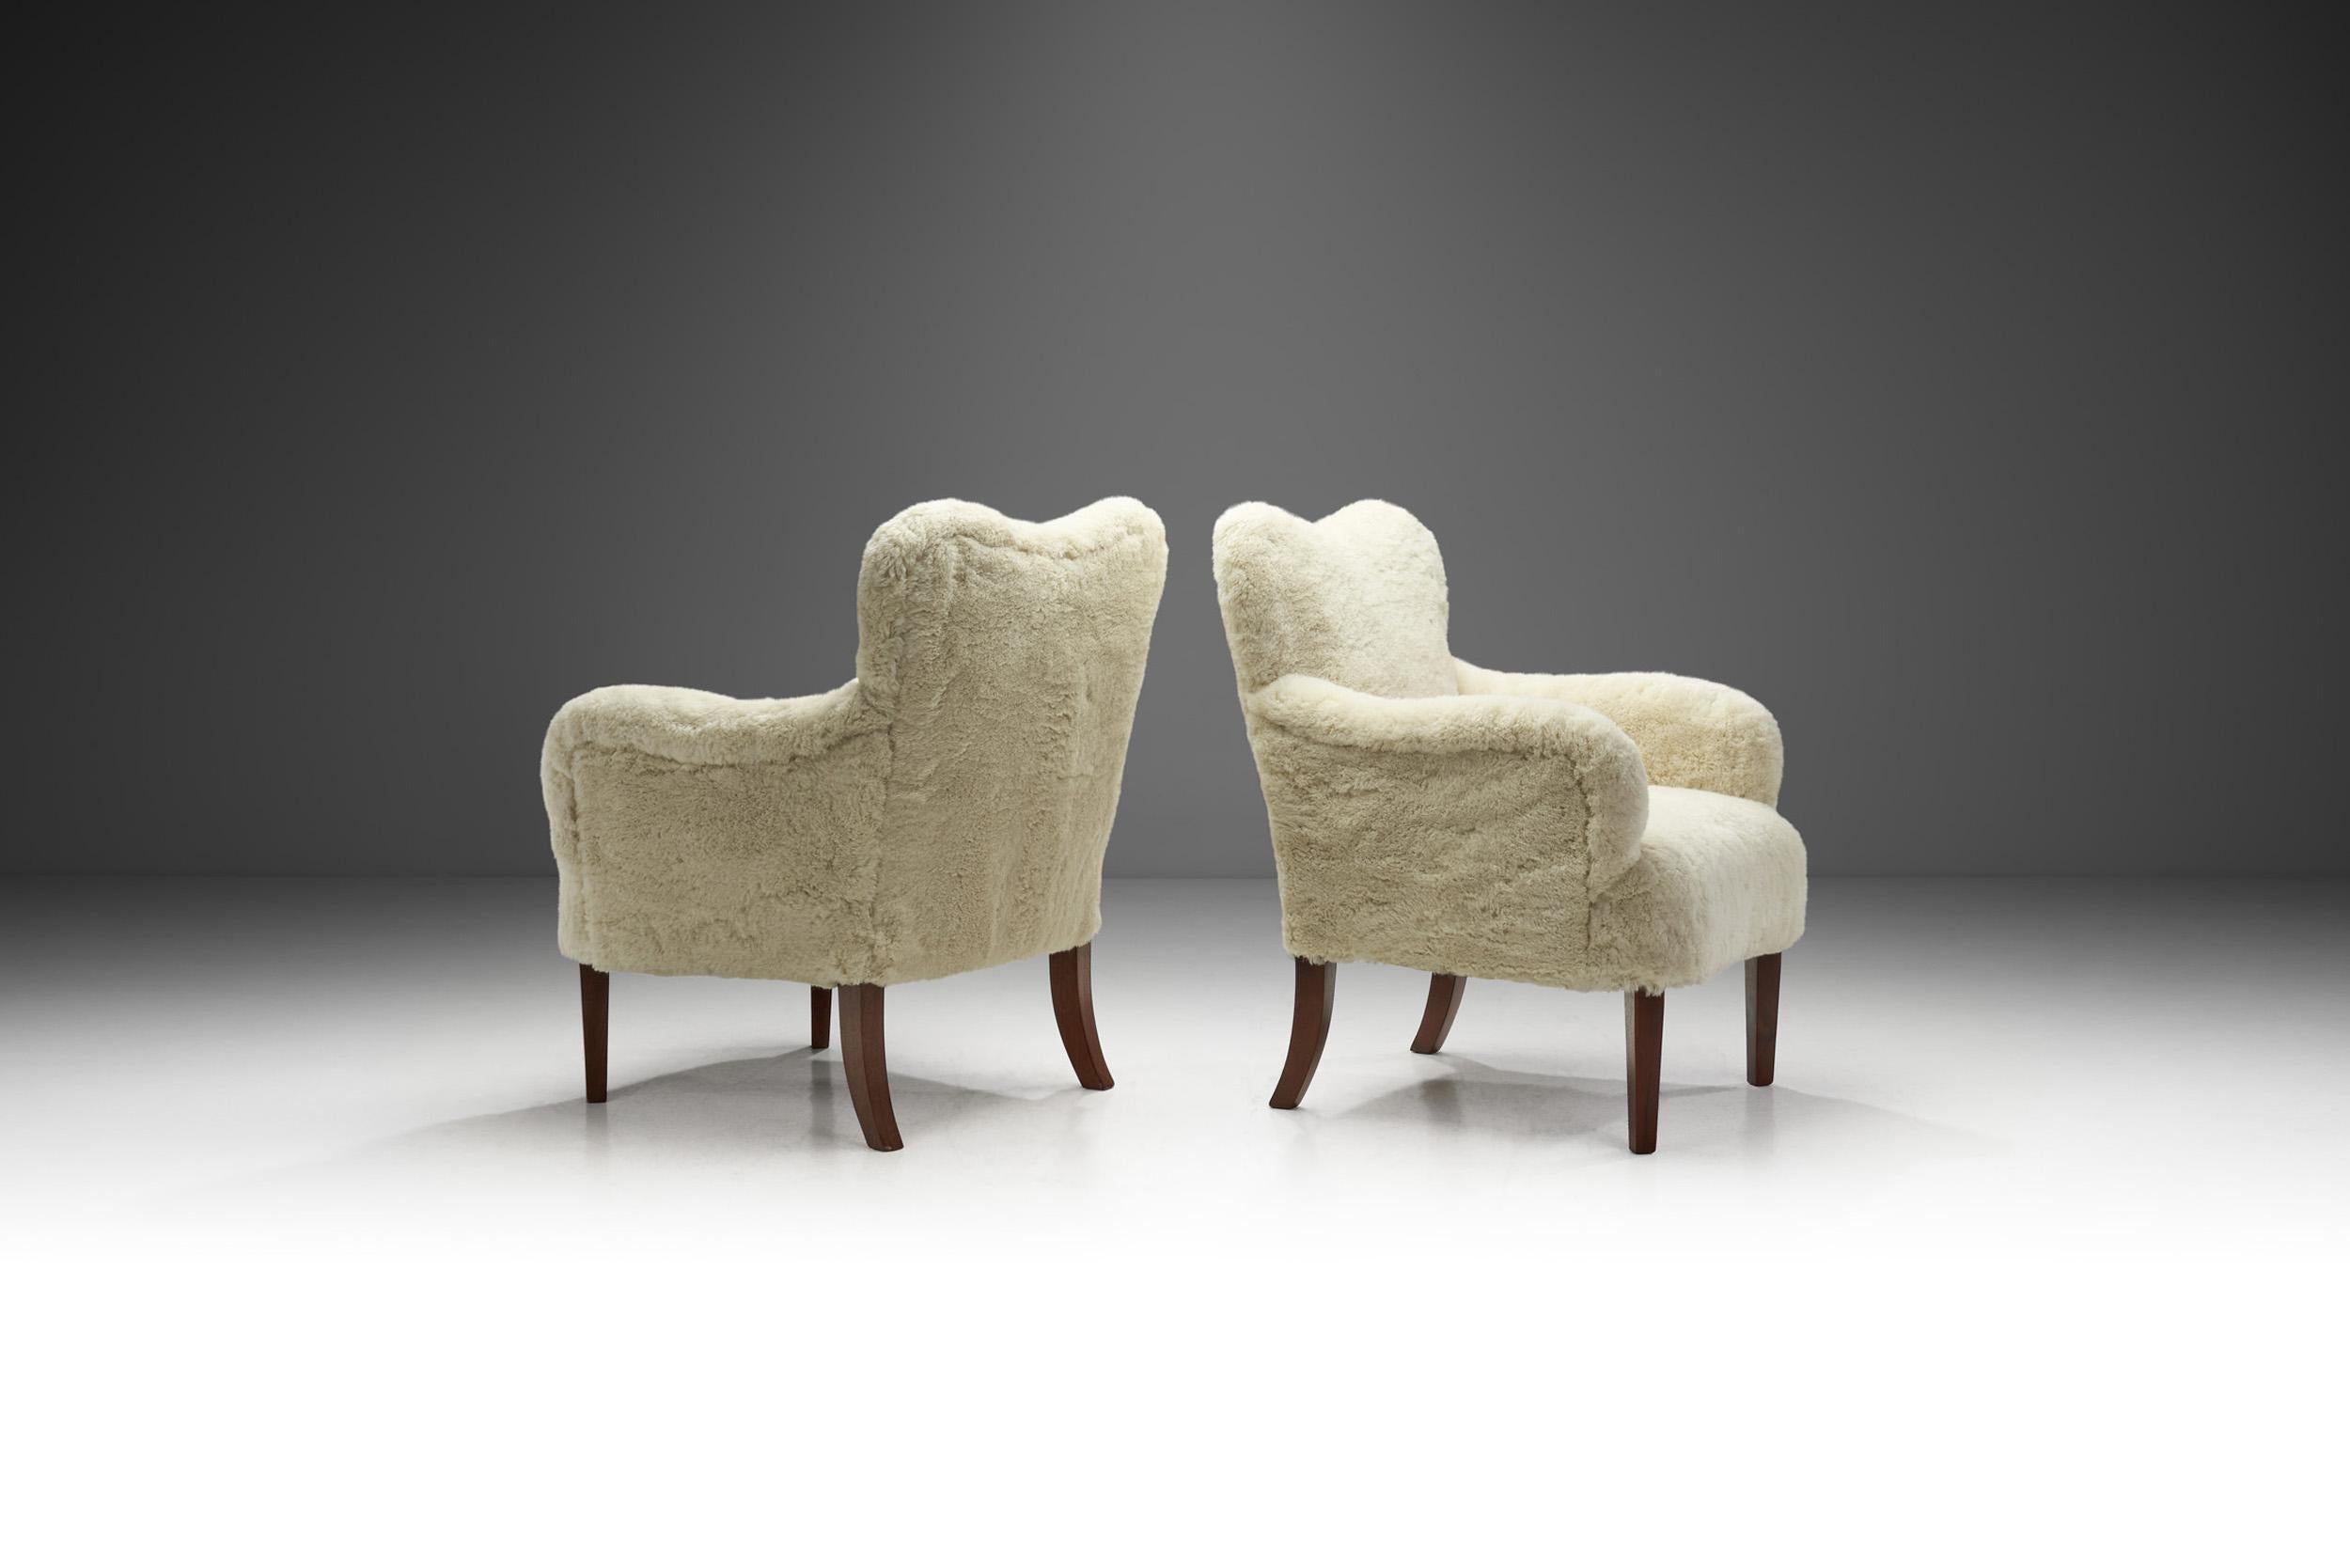 Mid-20th Century Danish Cabinetmaker Upholstered Easy Chairs, Denmark ca 1950s For Sale